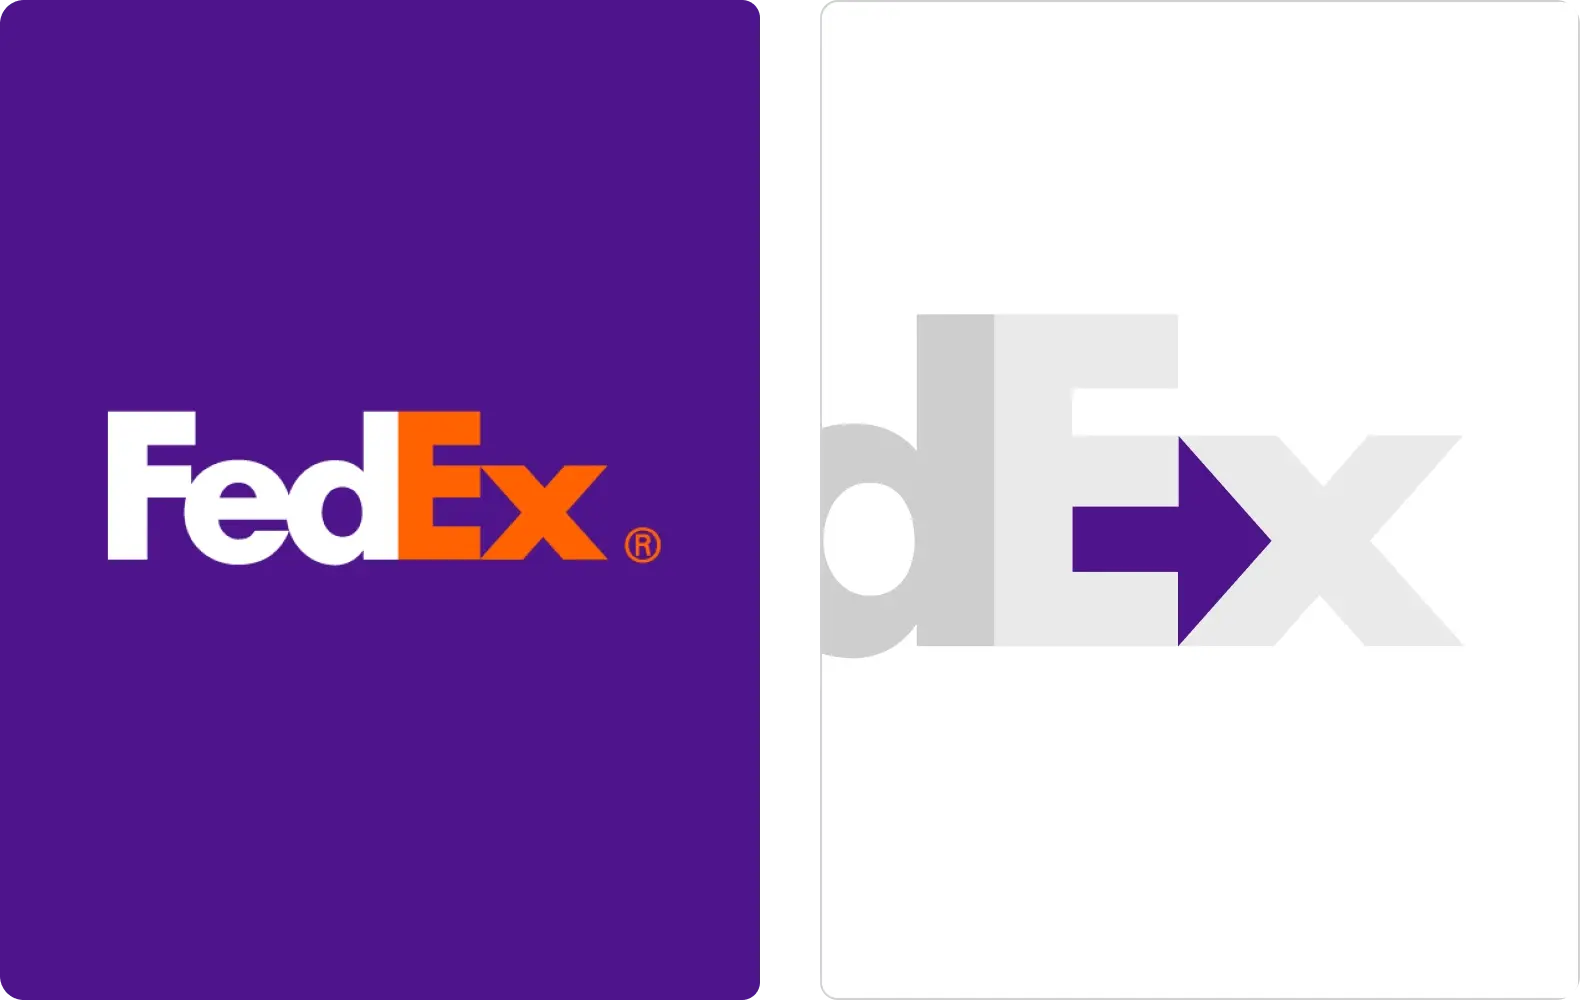 Side-by-side images of the FedEx logo. The image on the right makes use of empty space between E and X to show an arrow, indicating forward movement.